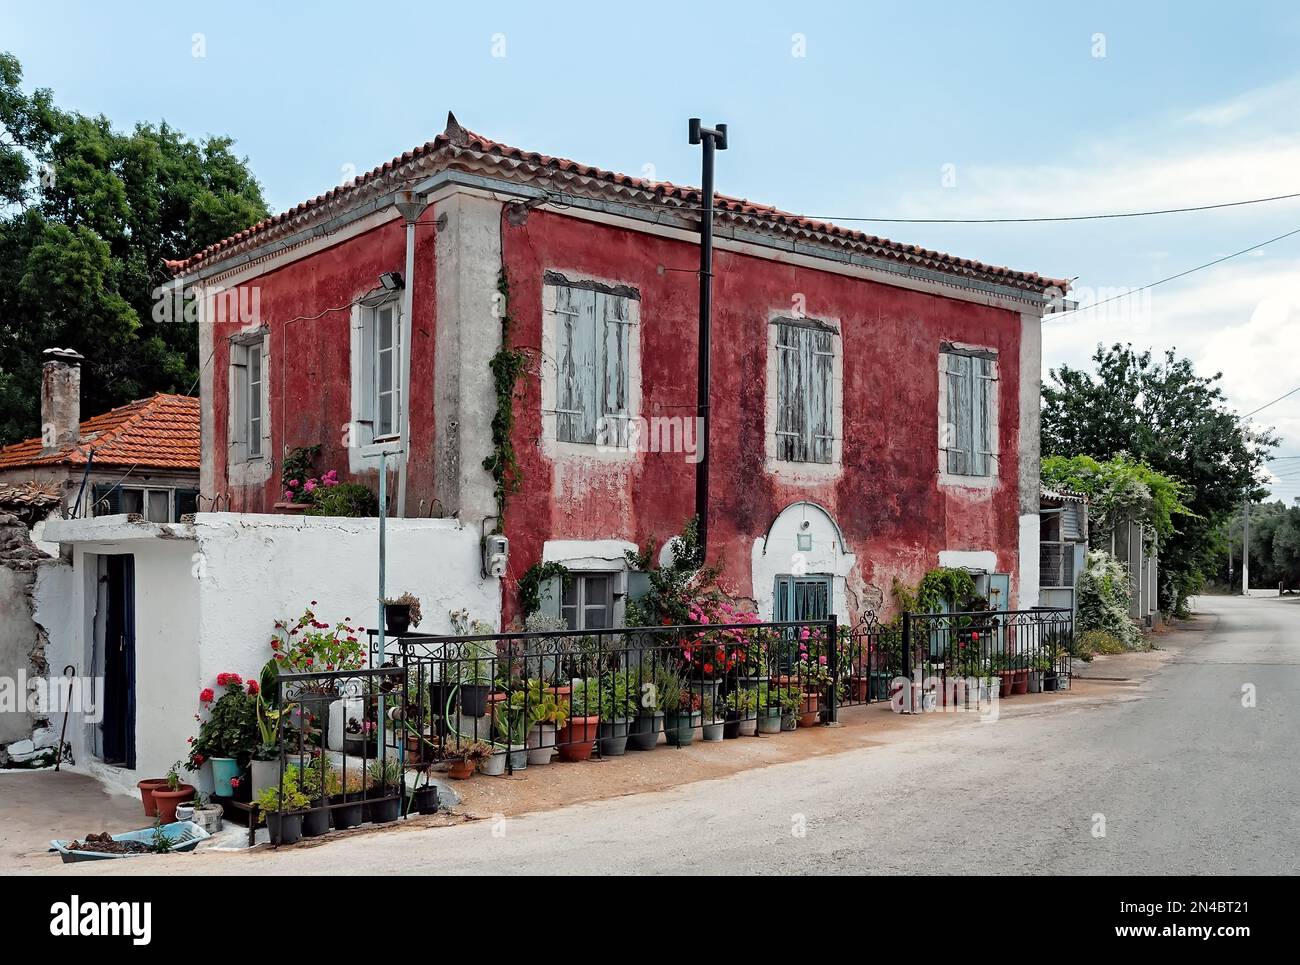 Old house decorated with flower pots, Zakynthos Greece Stock Photo